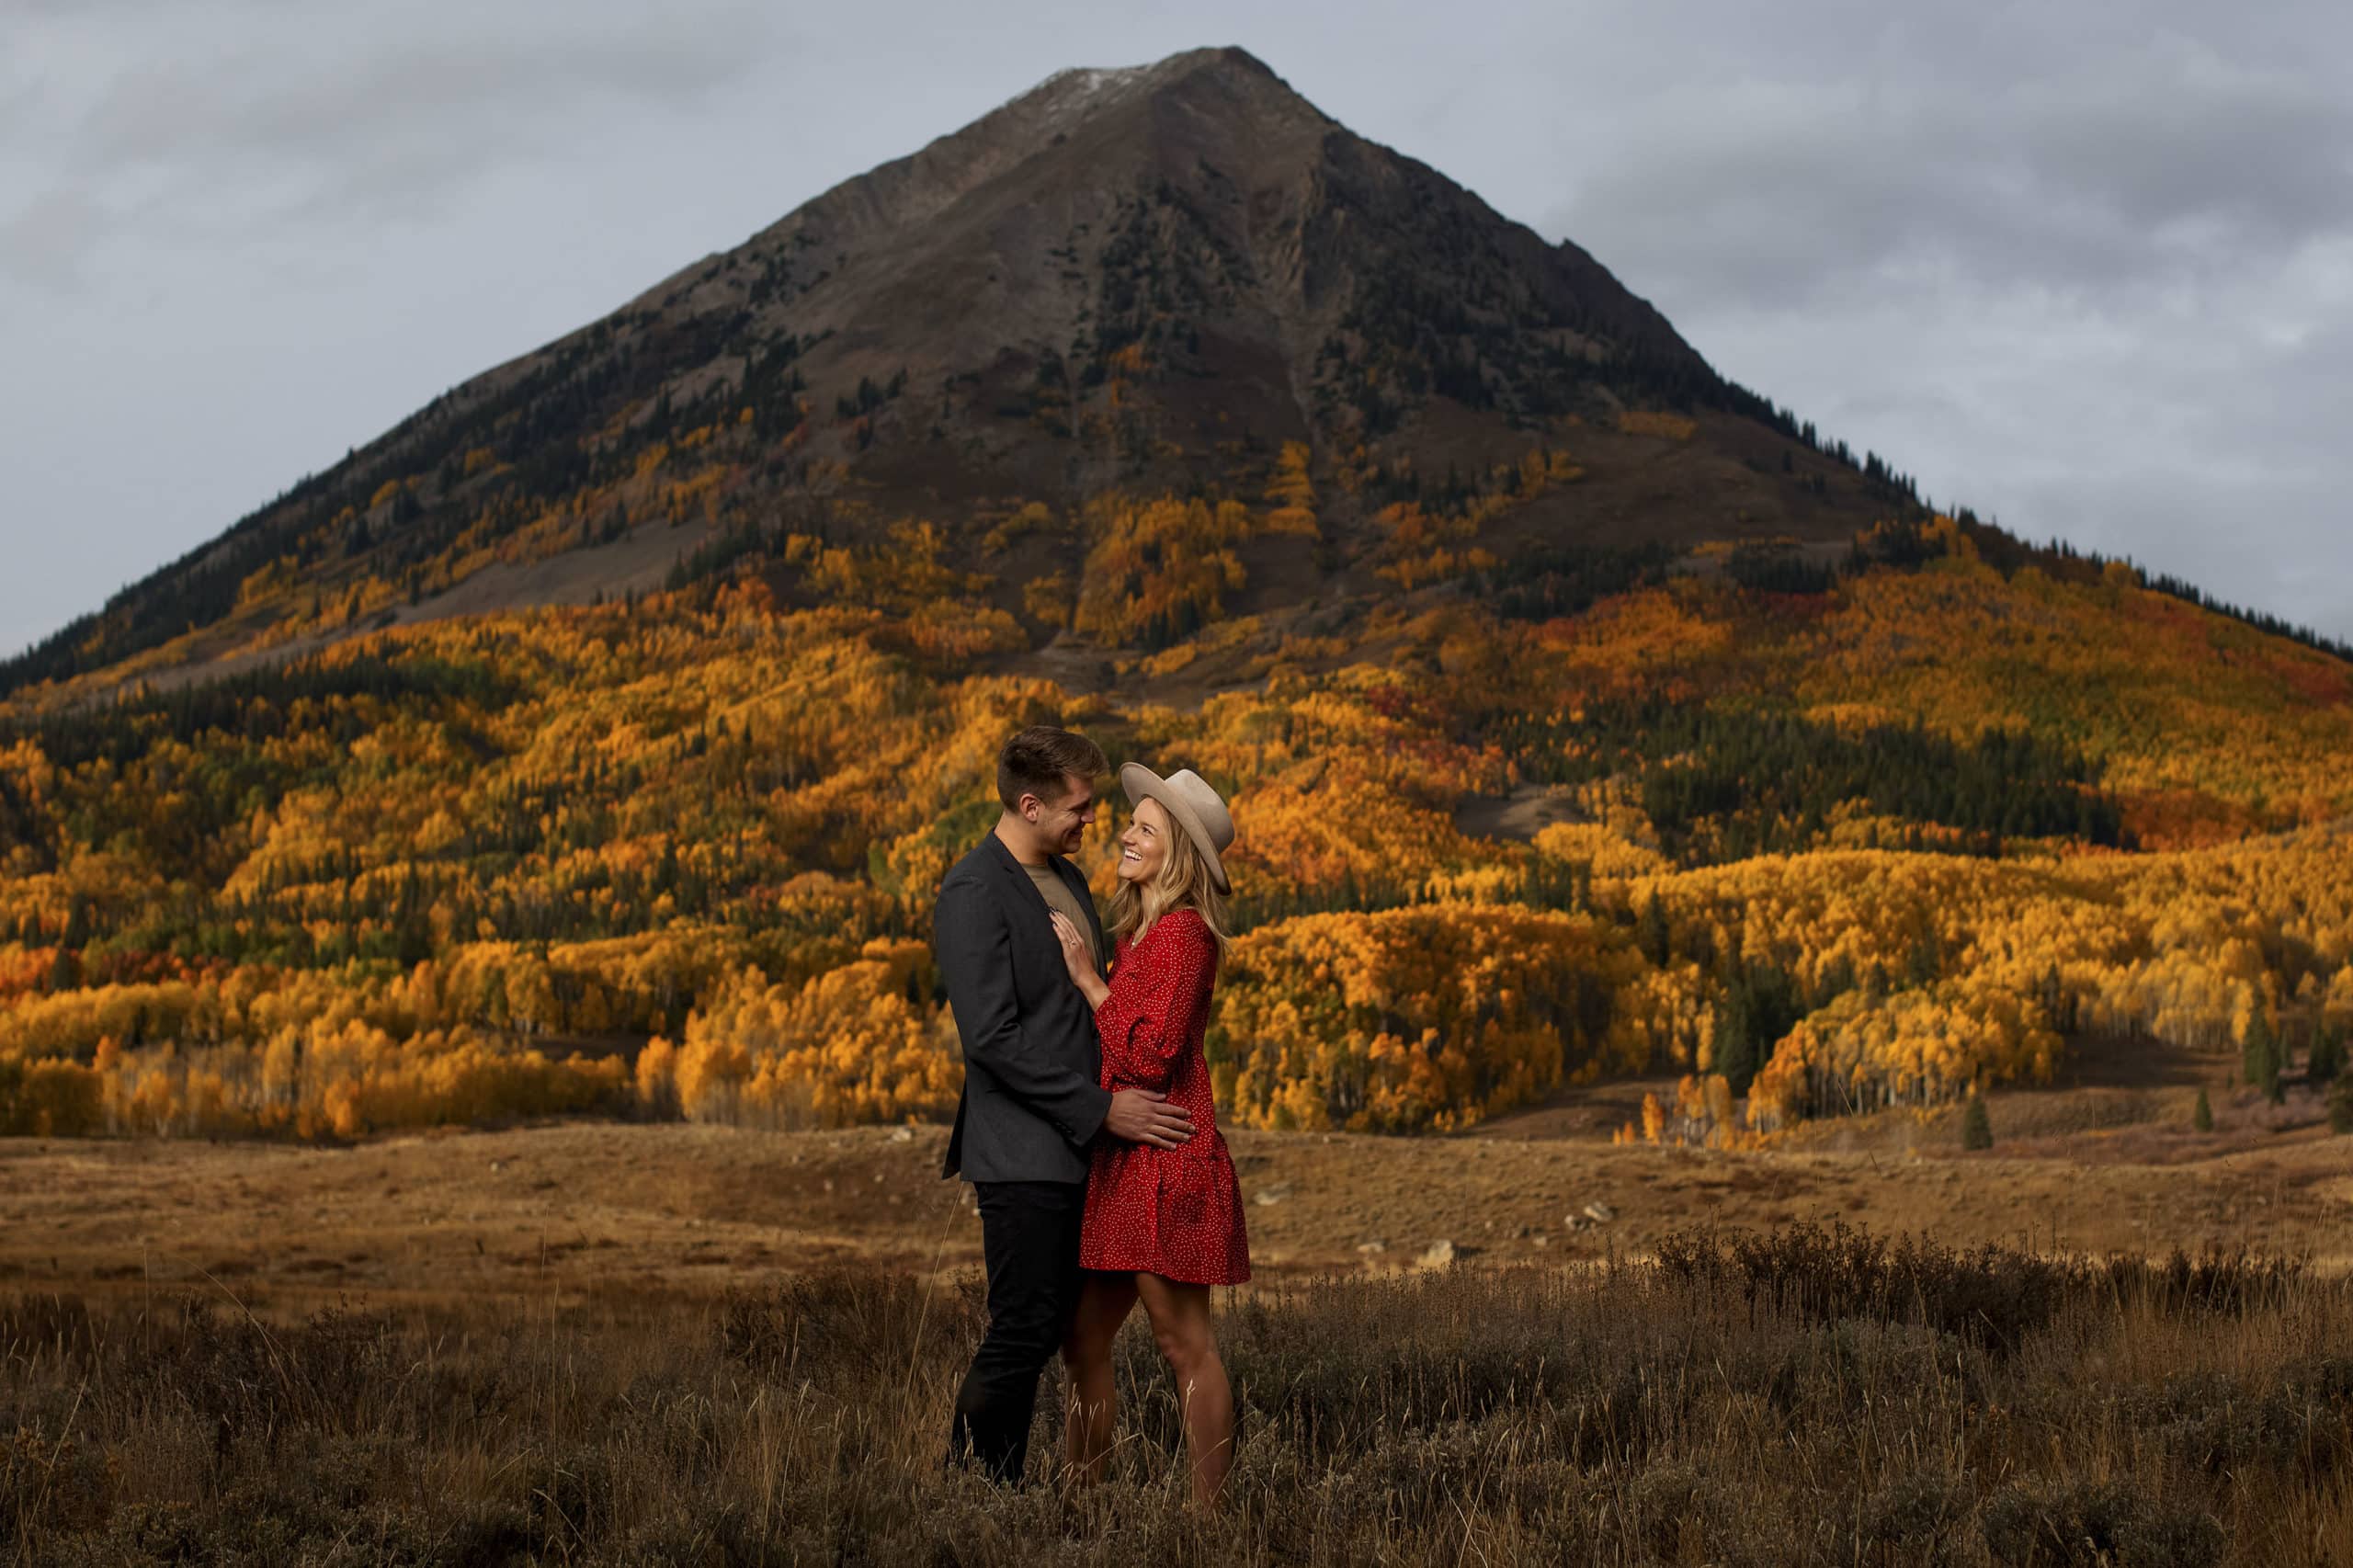 A woman in a red dress and man in a suit pose for a portrait as golden aspen trees glow on Gothic Mountain